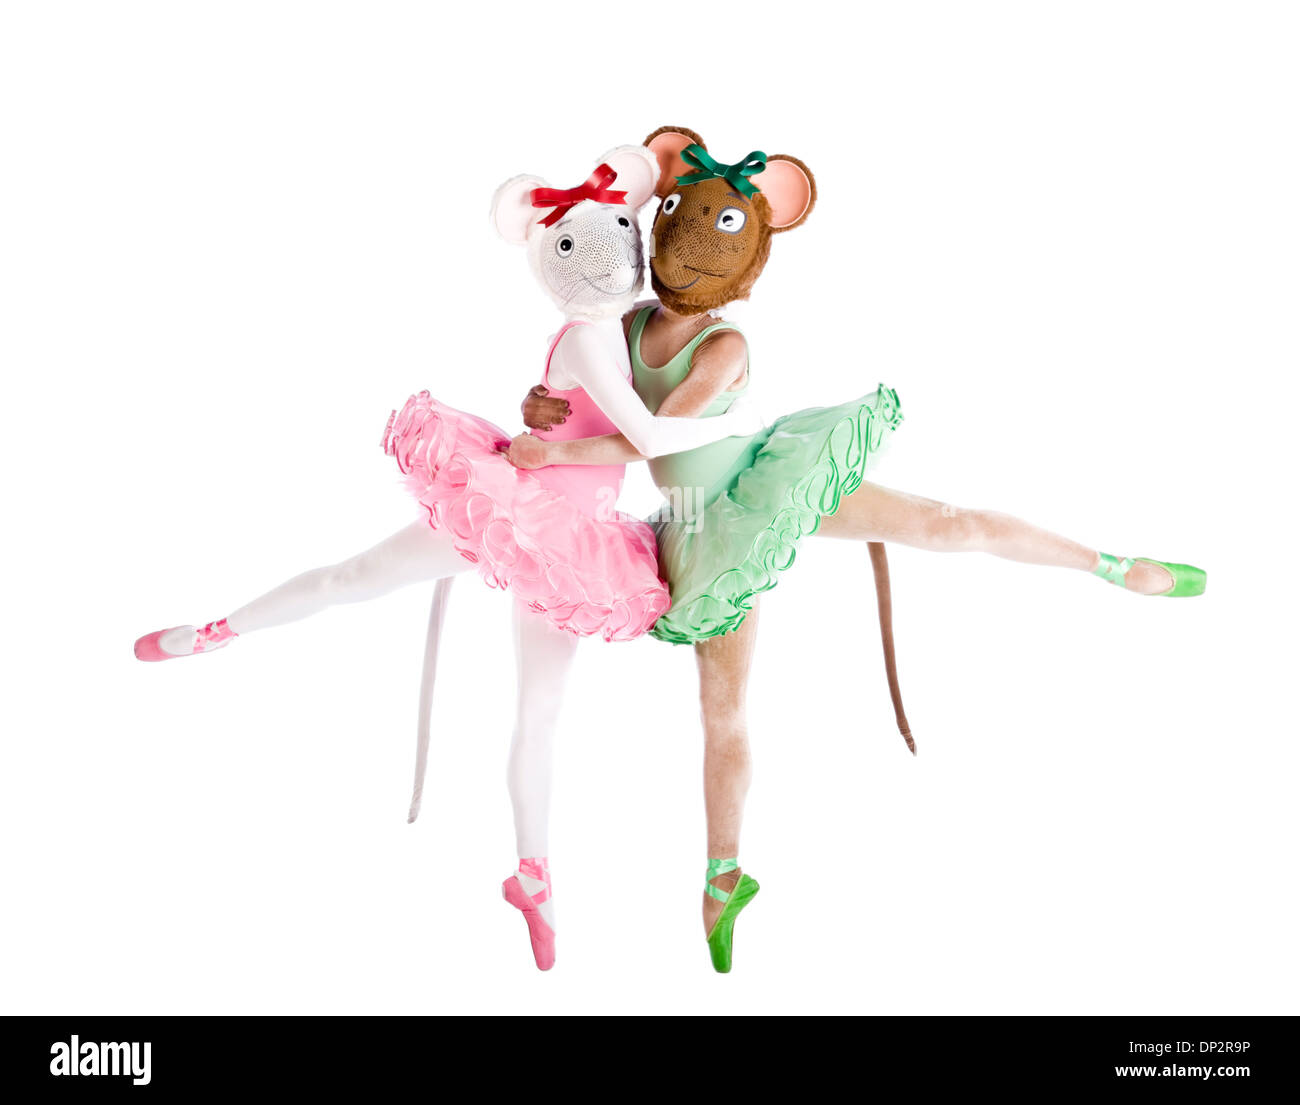 Angelina Ballerina and friend en pointe looking into camera photographed in the studio. Stock Photo